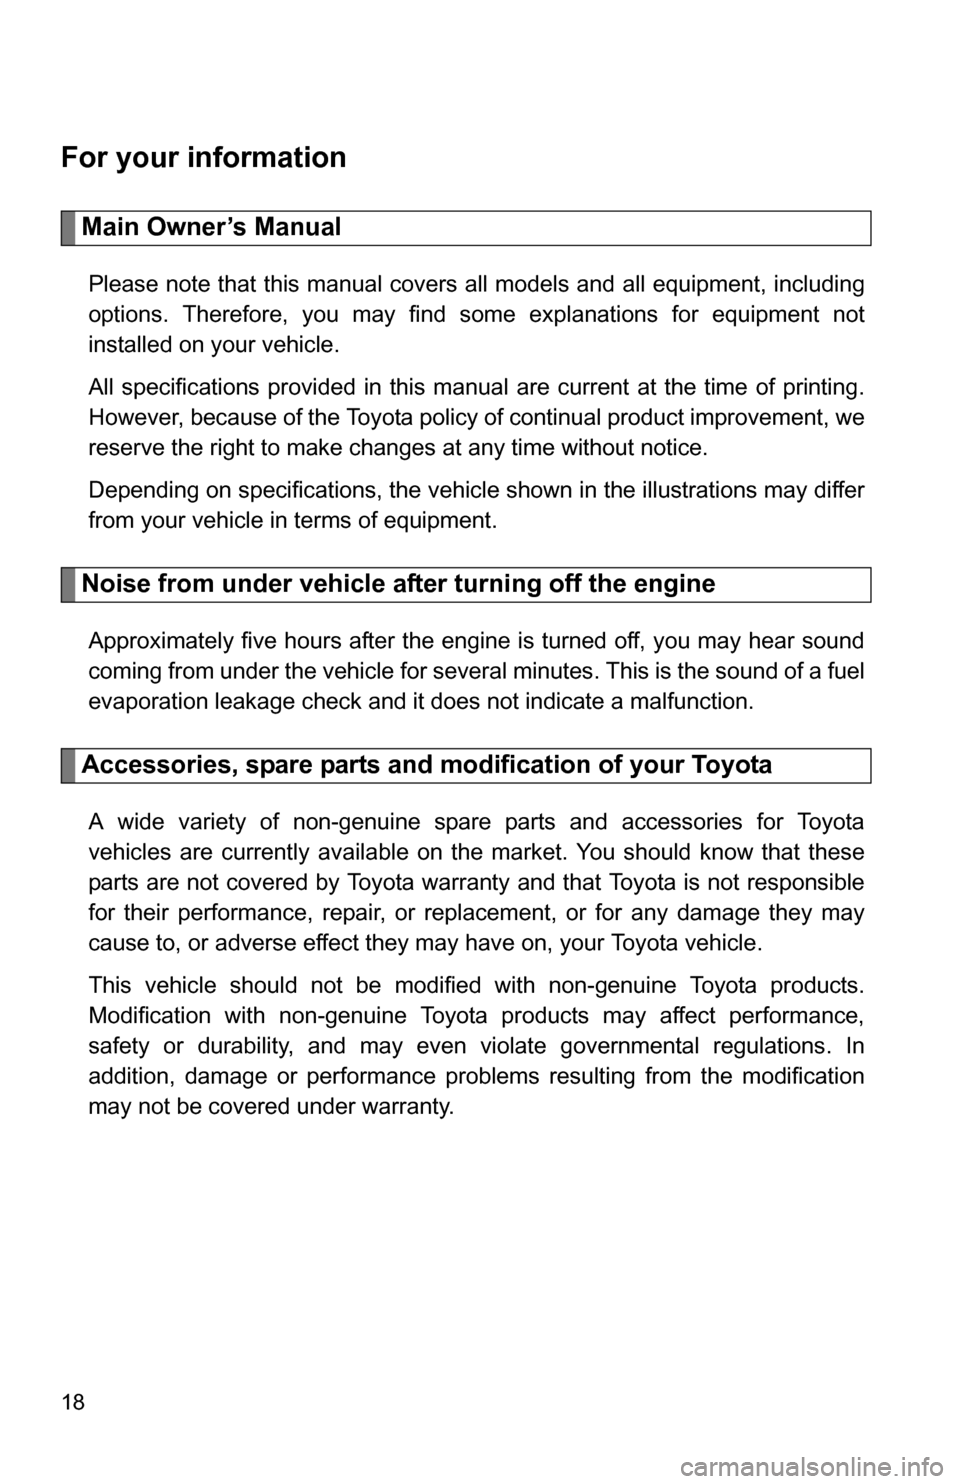 TOYOTA RAV4 2012 XA30 / 3.G User Guide 18
For your information
Main Owner’s Manual
Please note that this manual covers all models and all equipment, including
options. Therefore, you may find some explanations for equipment not
installed